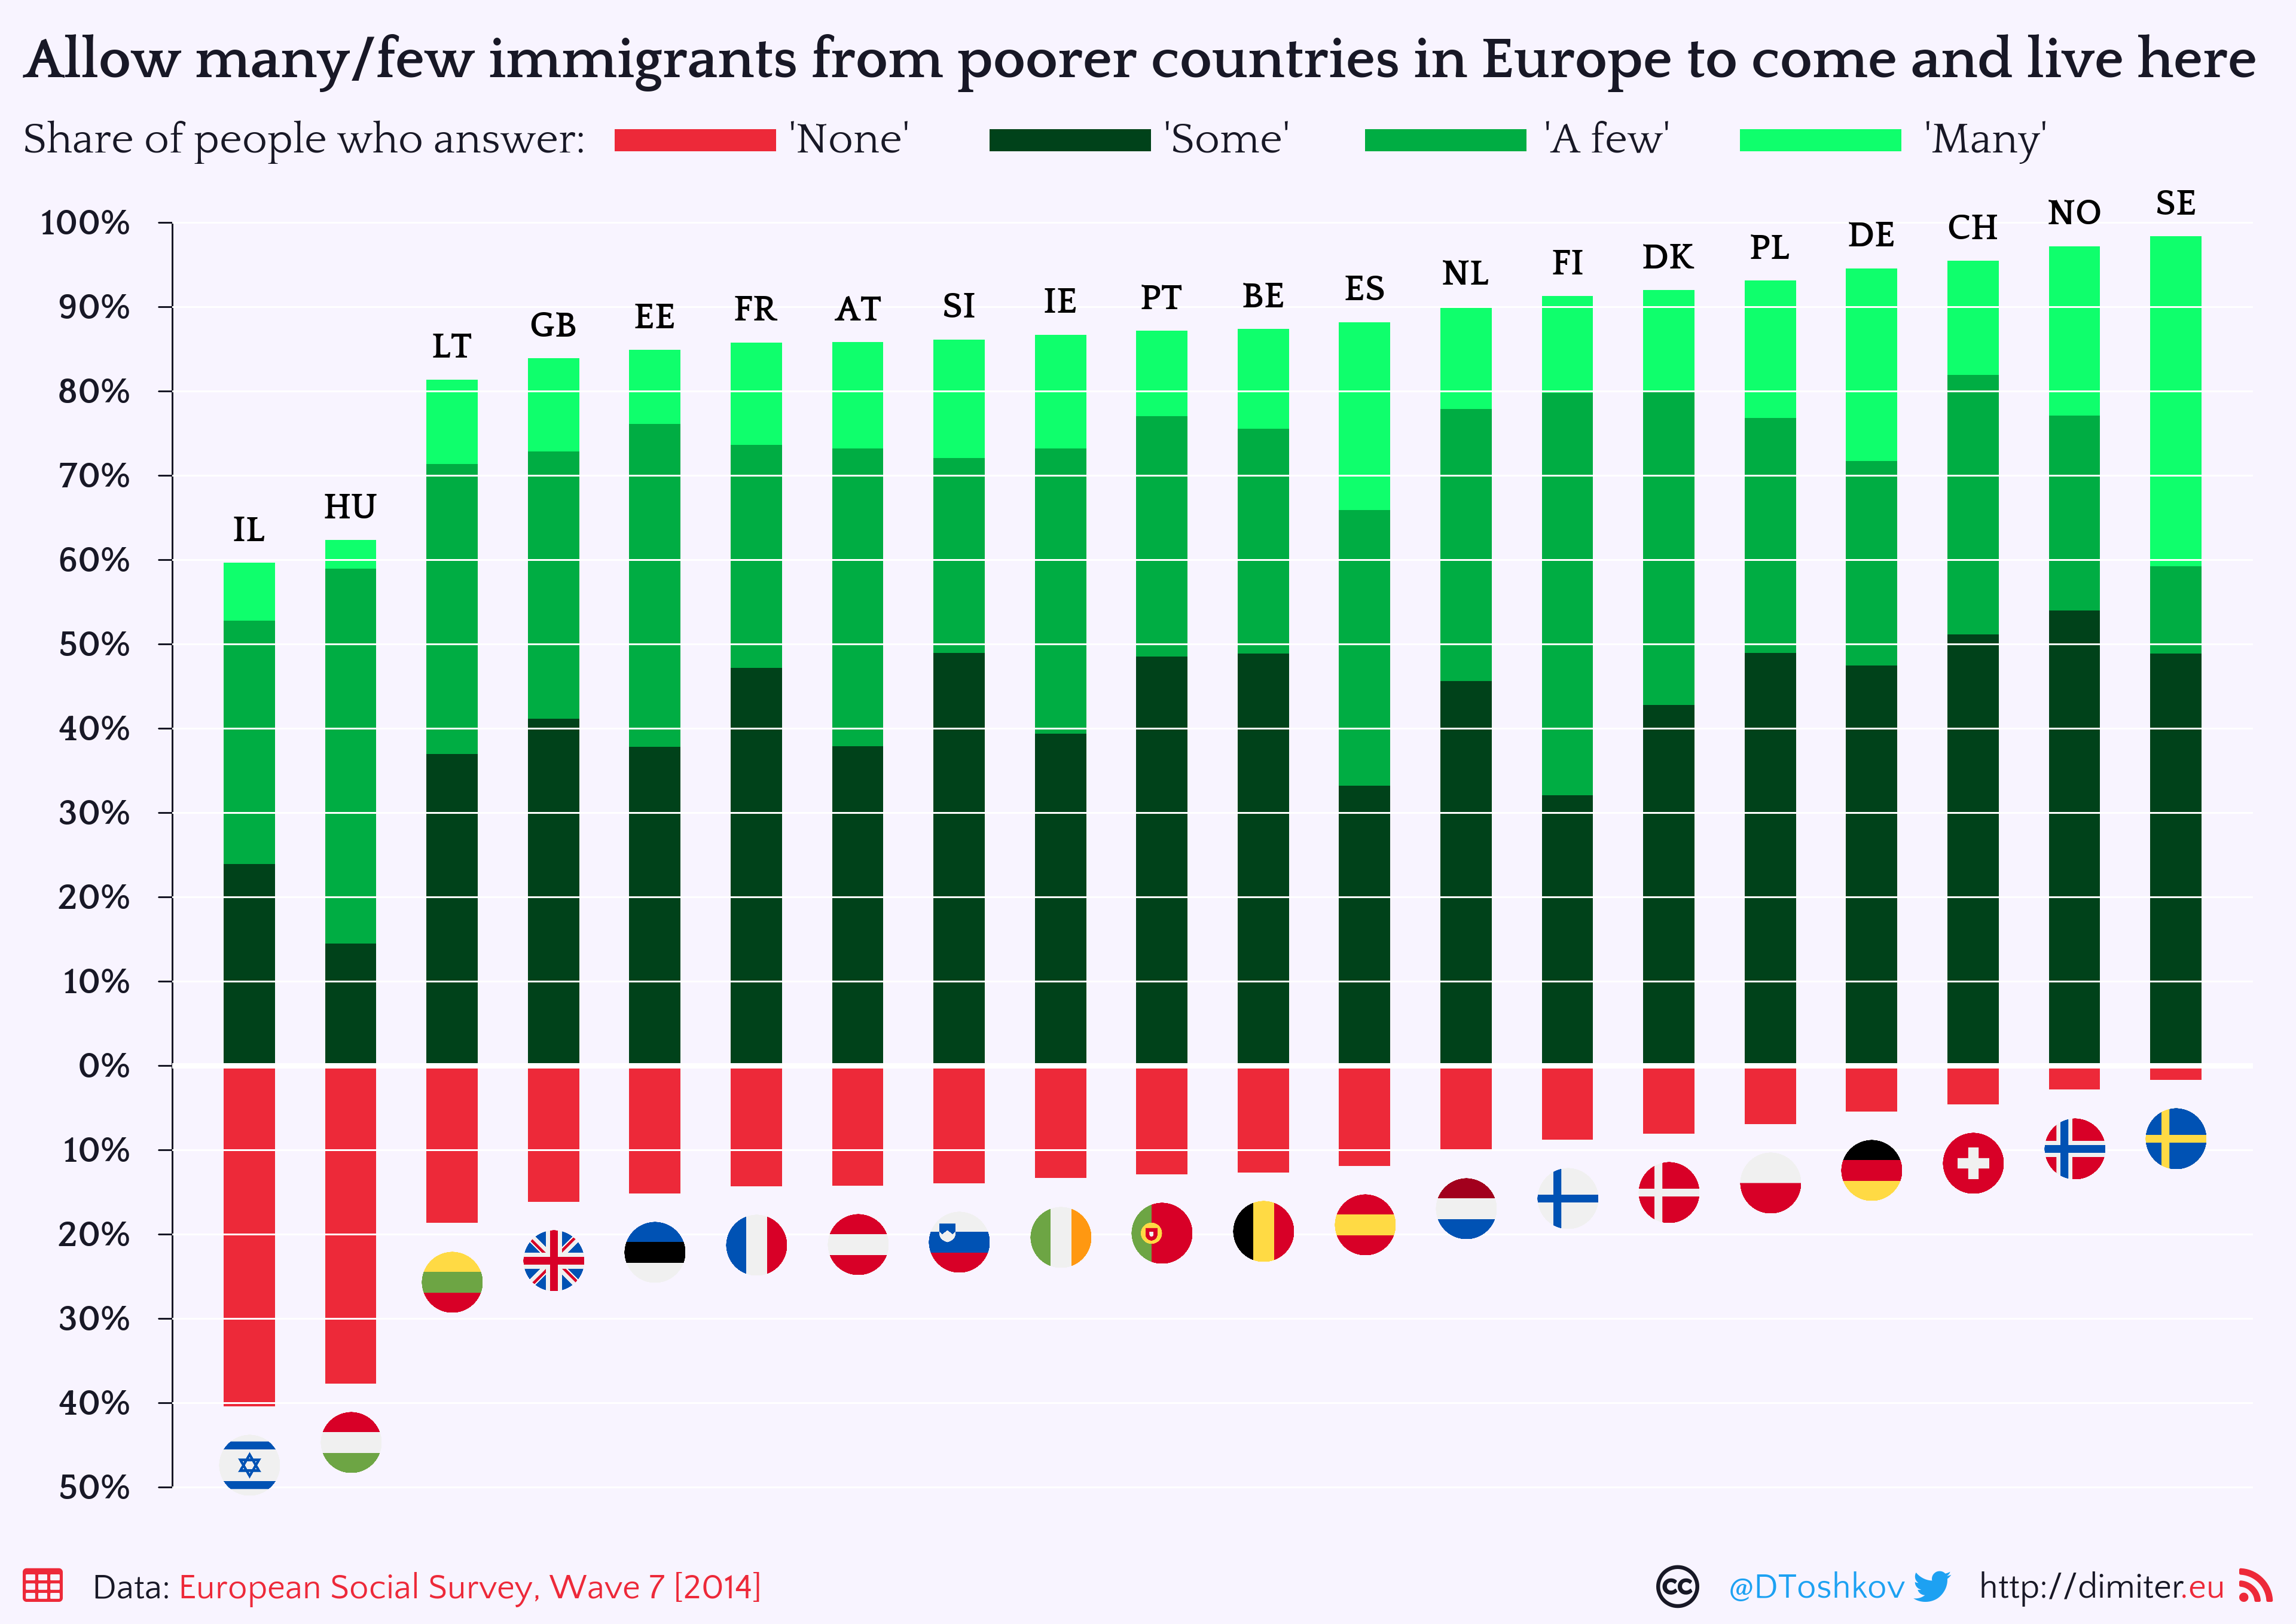 Comparative percentages by country regarding immigration tolerance, from the European Social Survey Round 7. Source: [Dimiter Toshkov 2020](https://dimiter.eu/Visualizations_files/ESS/Visualizing_ESS_data.html#saving_the_visualization)